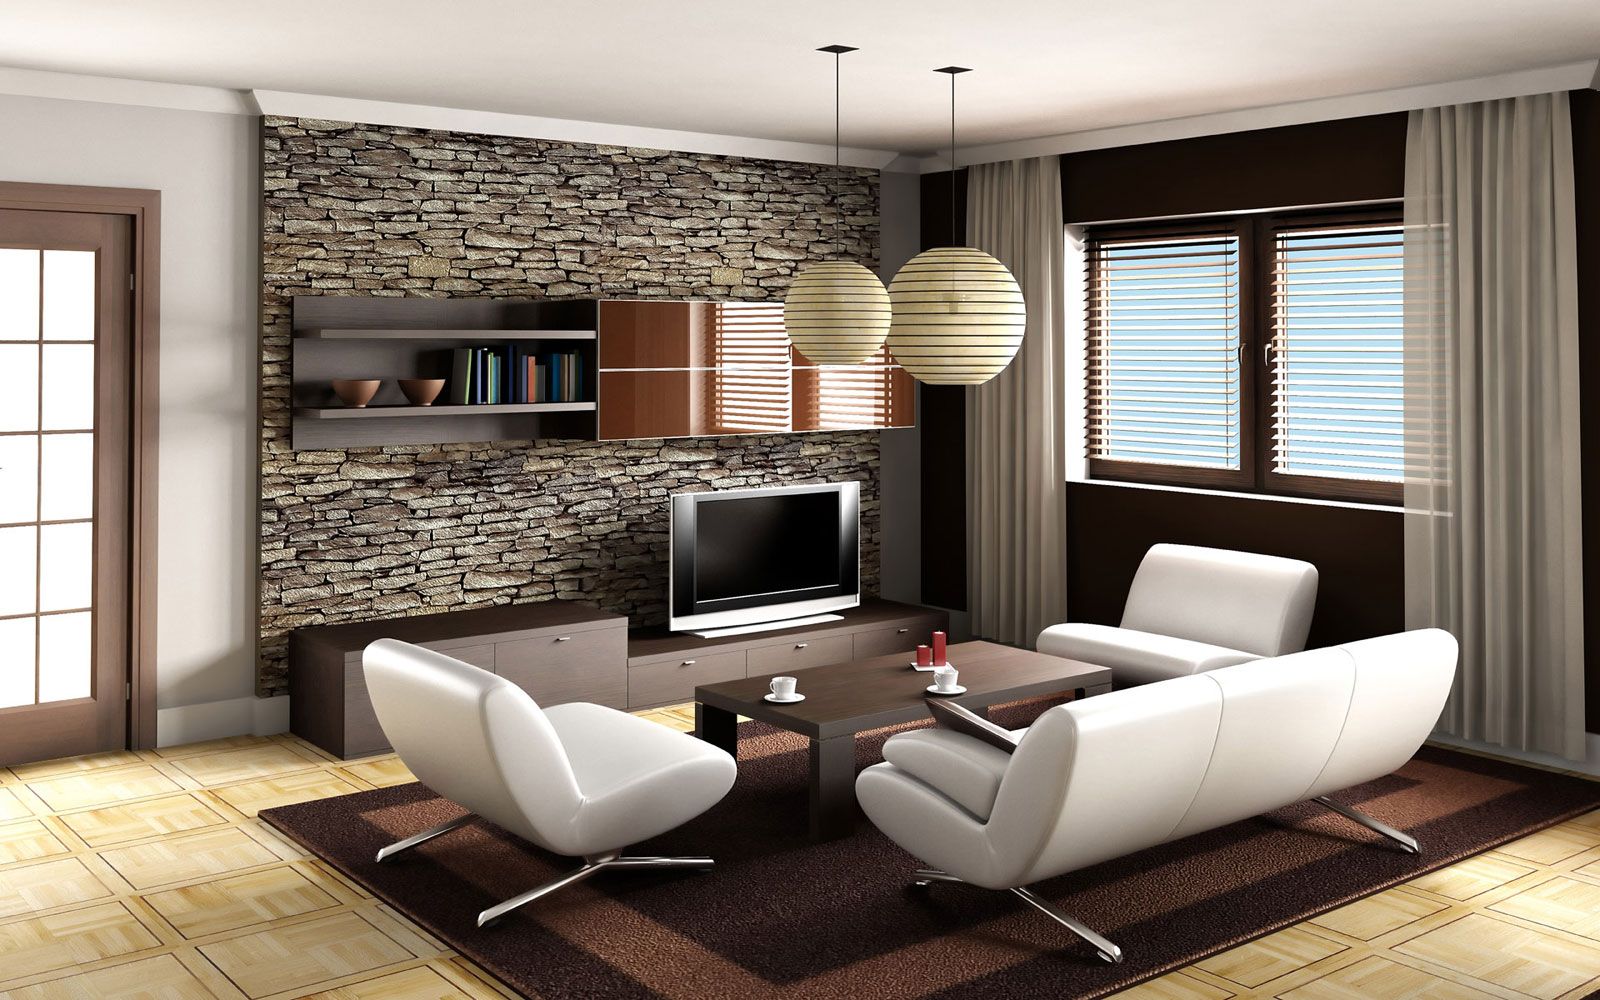 Brown Living Ideas Adorable Brown Living Room Design Ideas With Ball Pendant Lamps Furnished With Sofa And Armless Chairs In White Completed With Dark Brown Table On Thick Rug Living Room Living Room Design Ideas Which Is Designed For Modern House